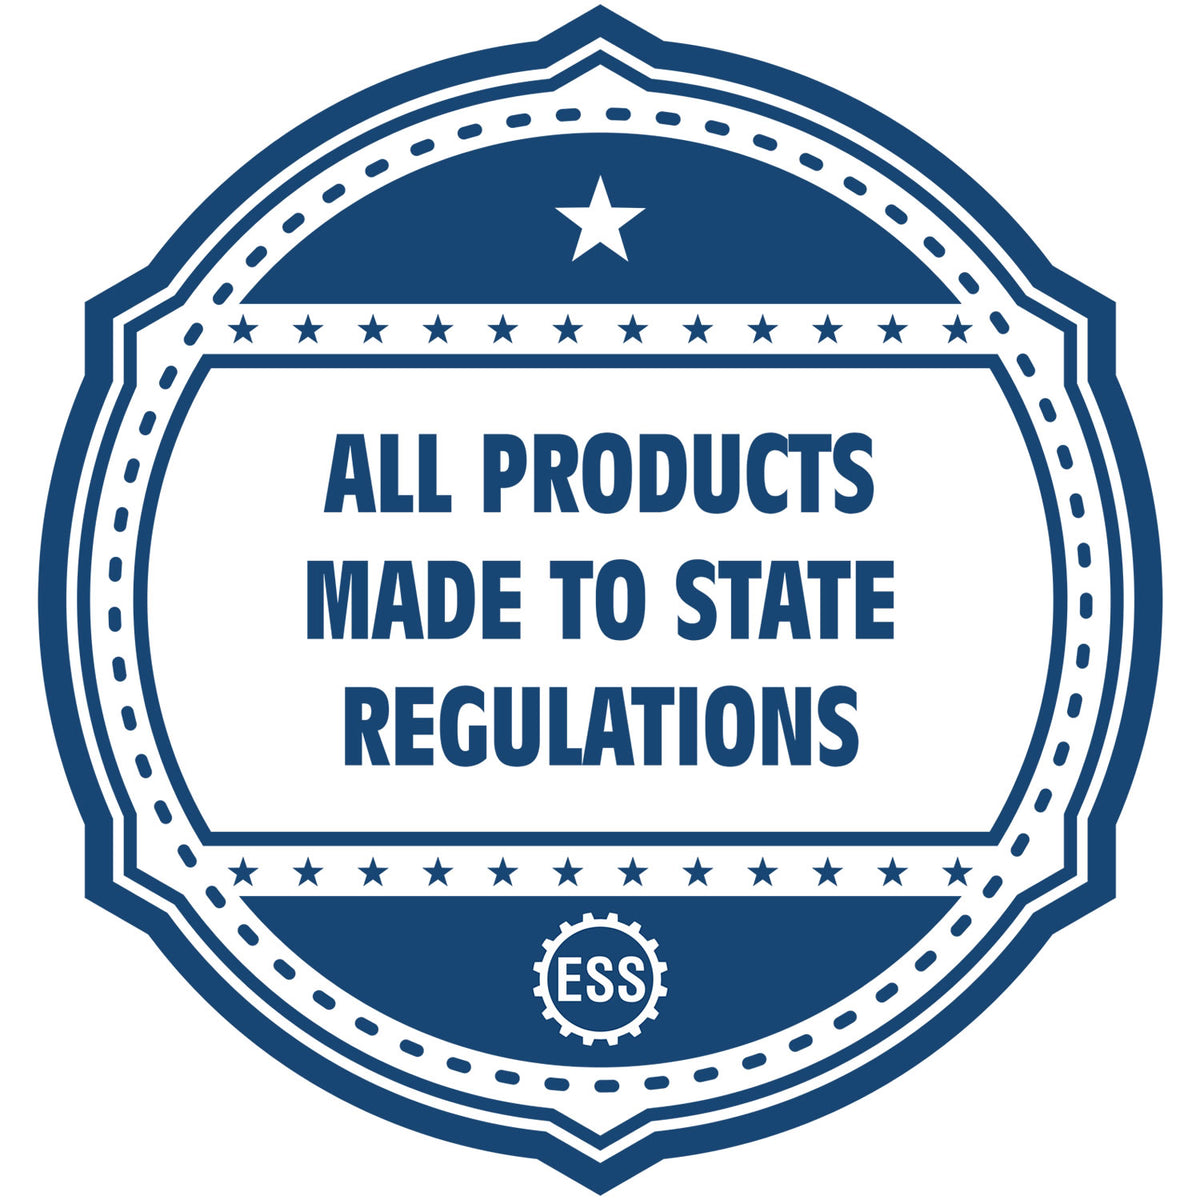 A blue icon or badge for the Heavy Duty Cast Iron Oklahoma Geologist Seal Embosser showing that this product is made in compliance with state regulations.